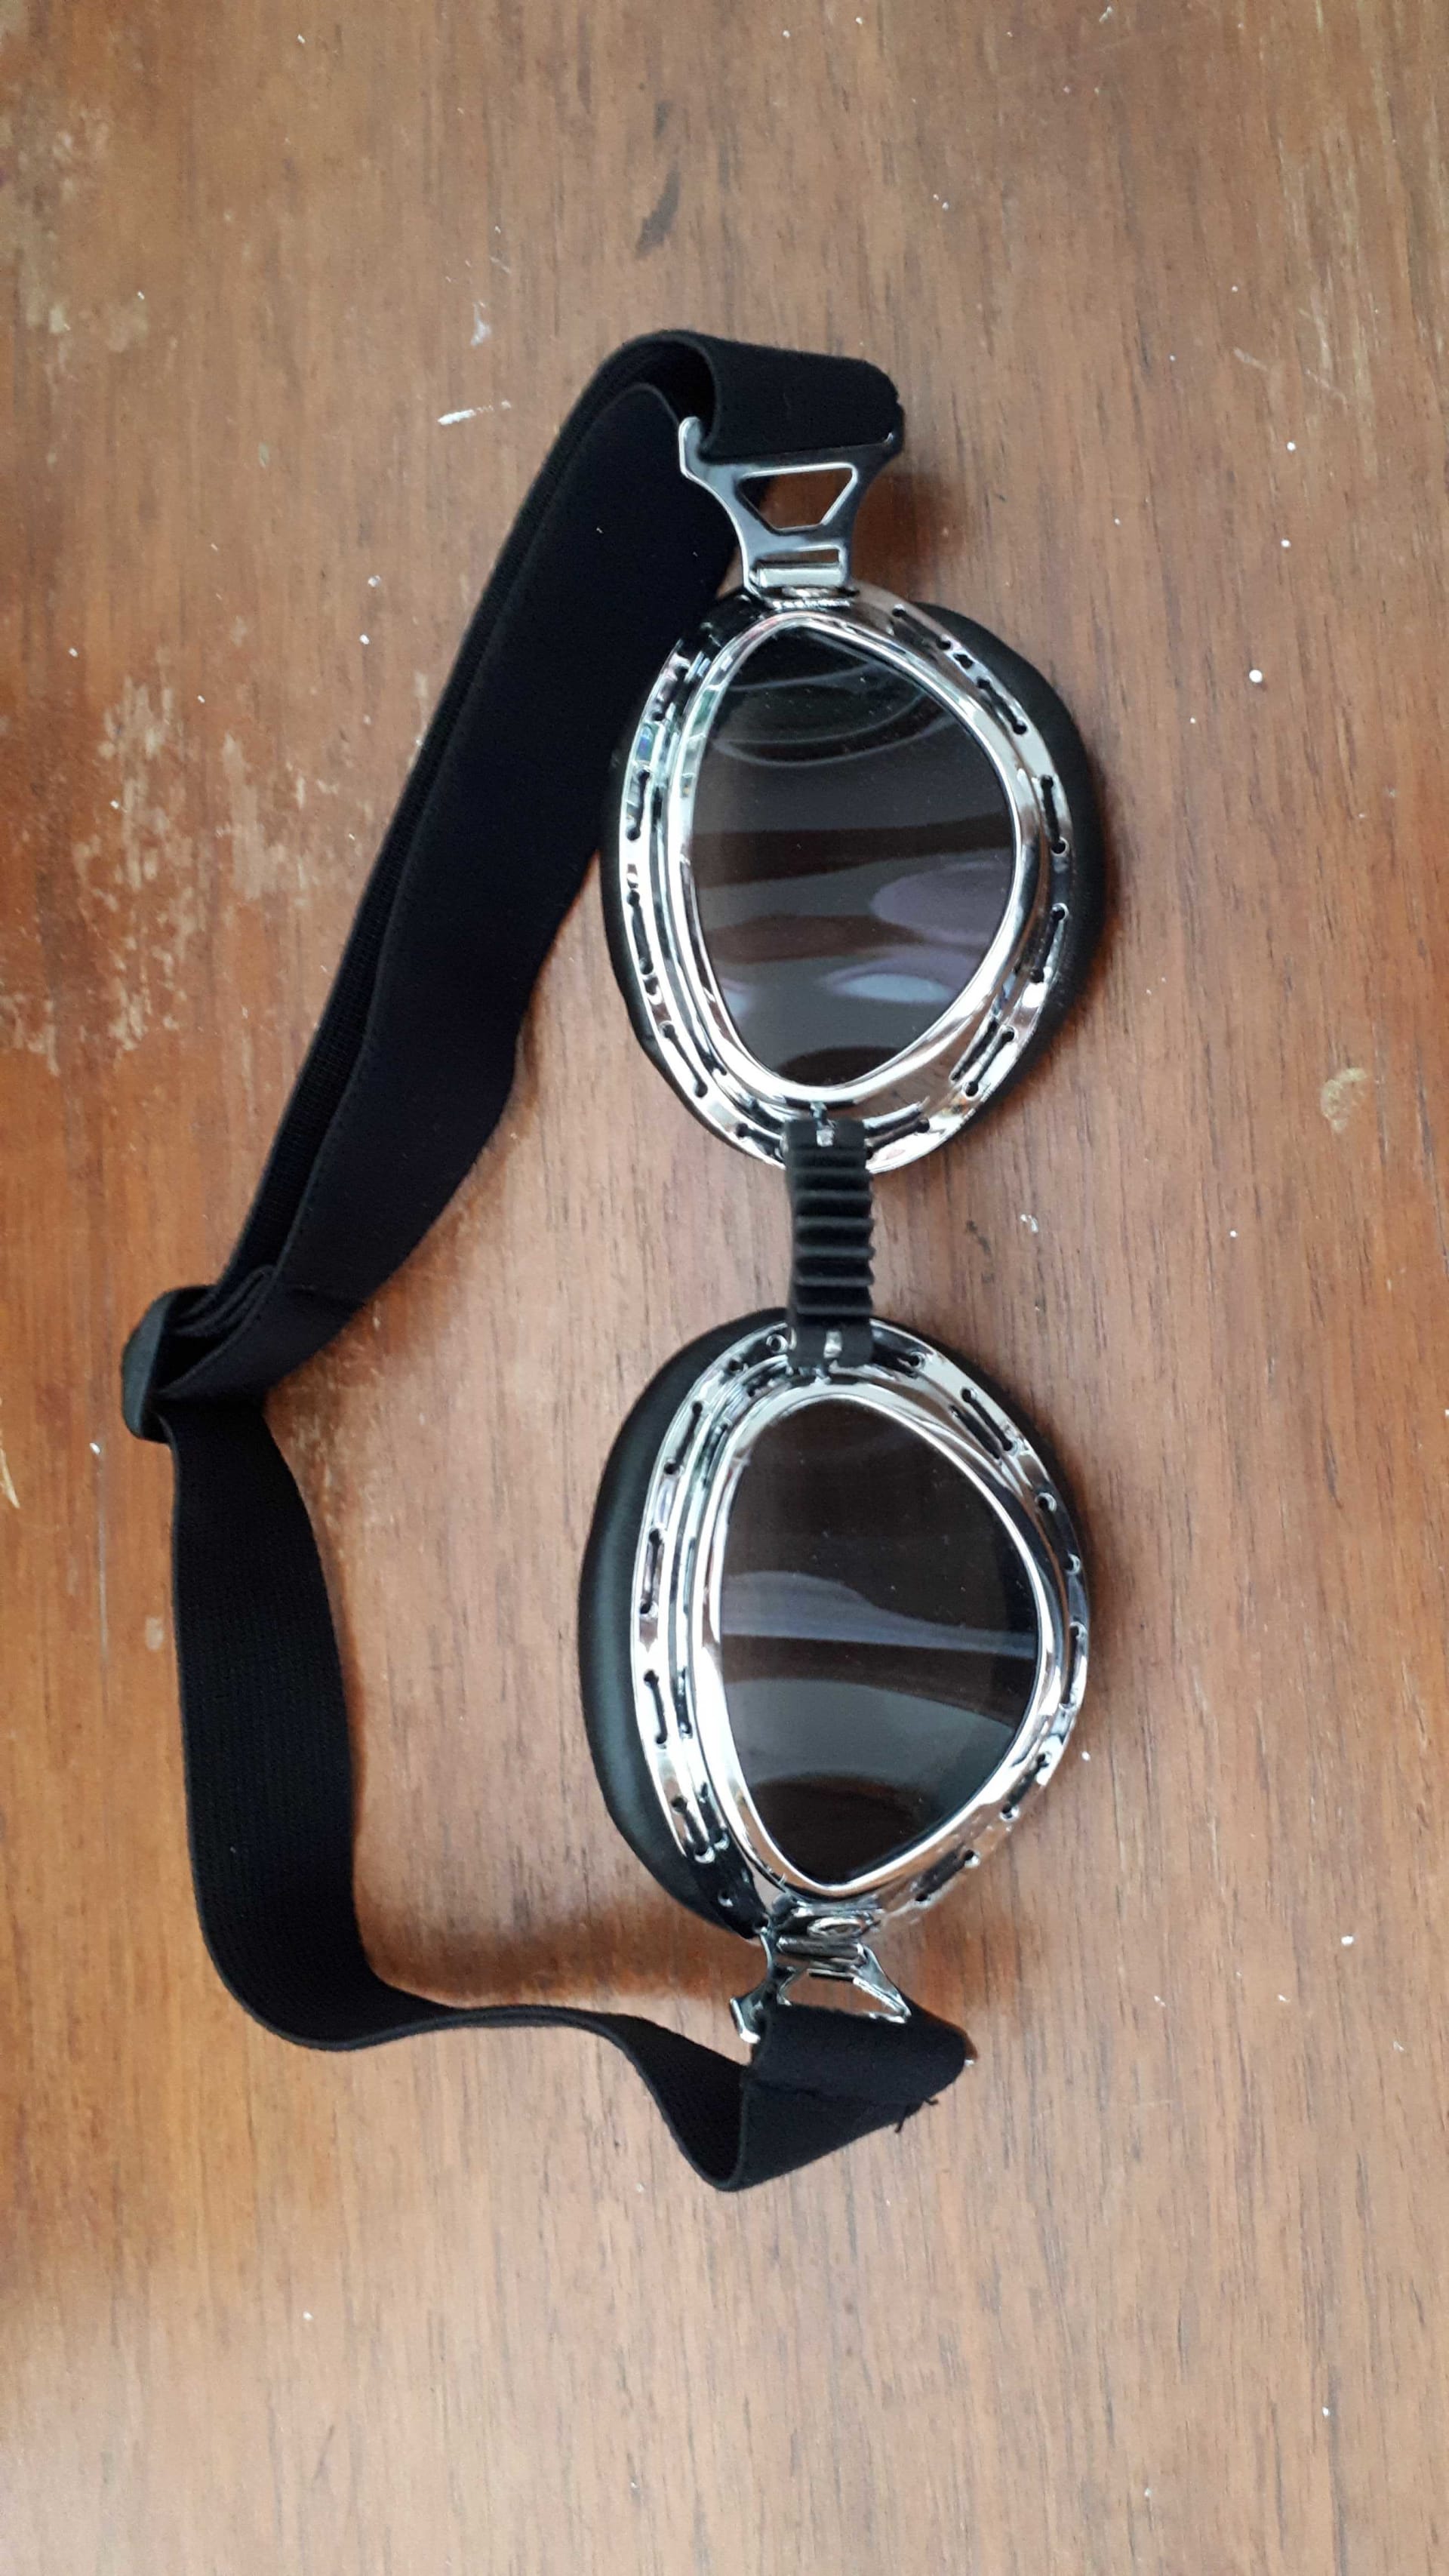 khiral-goggles-in-excellent-condition-used